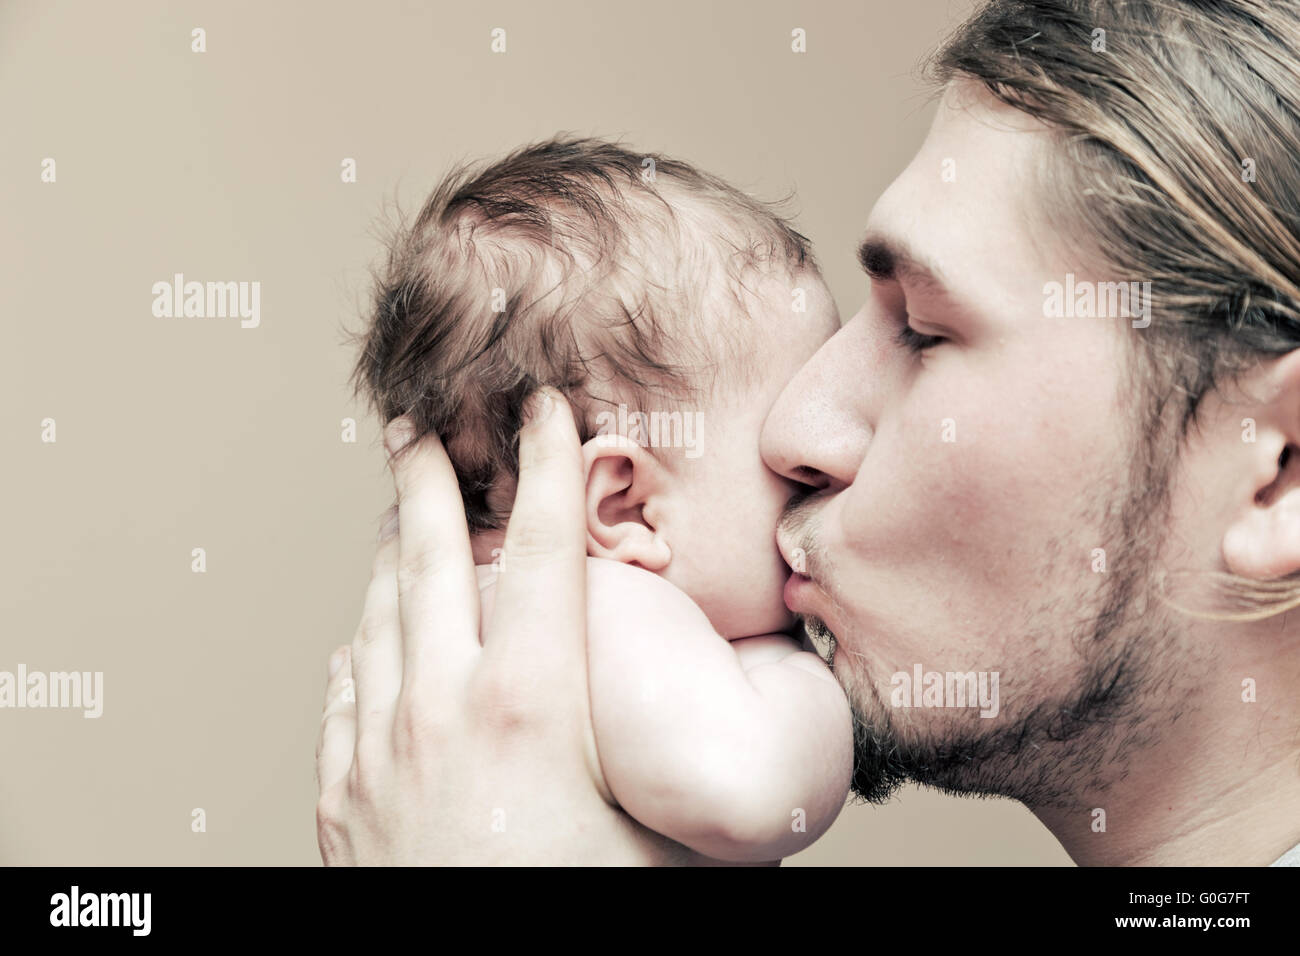 Father with his young baby cuddling and kissing him on cheek. Parenthood Stock Photo